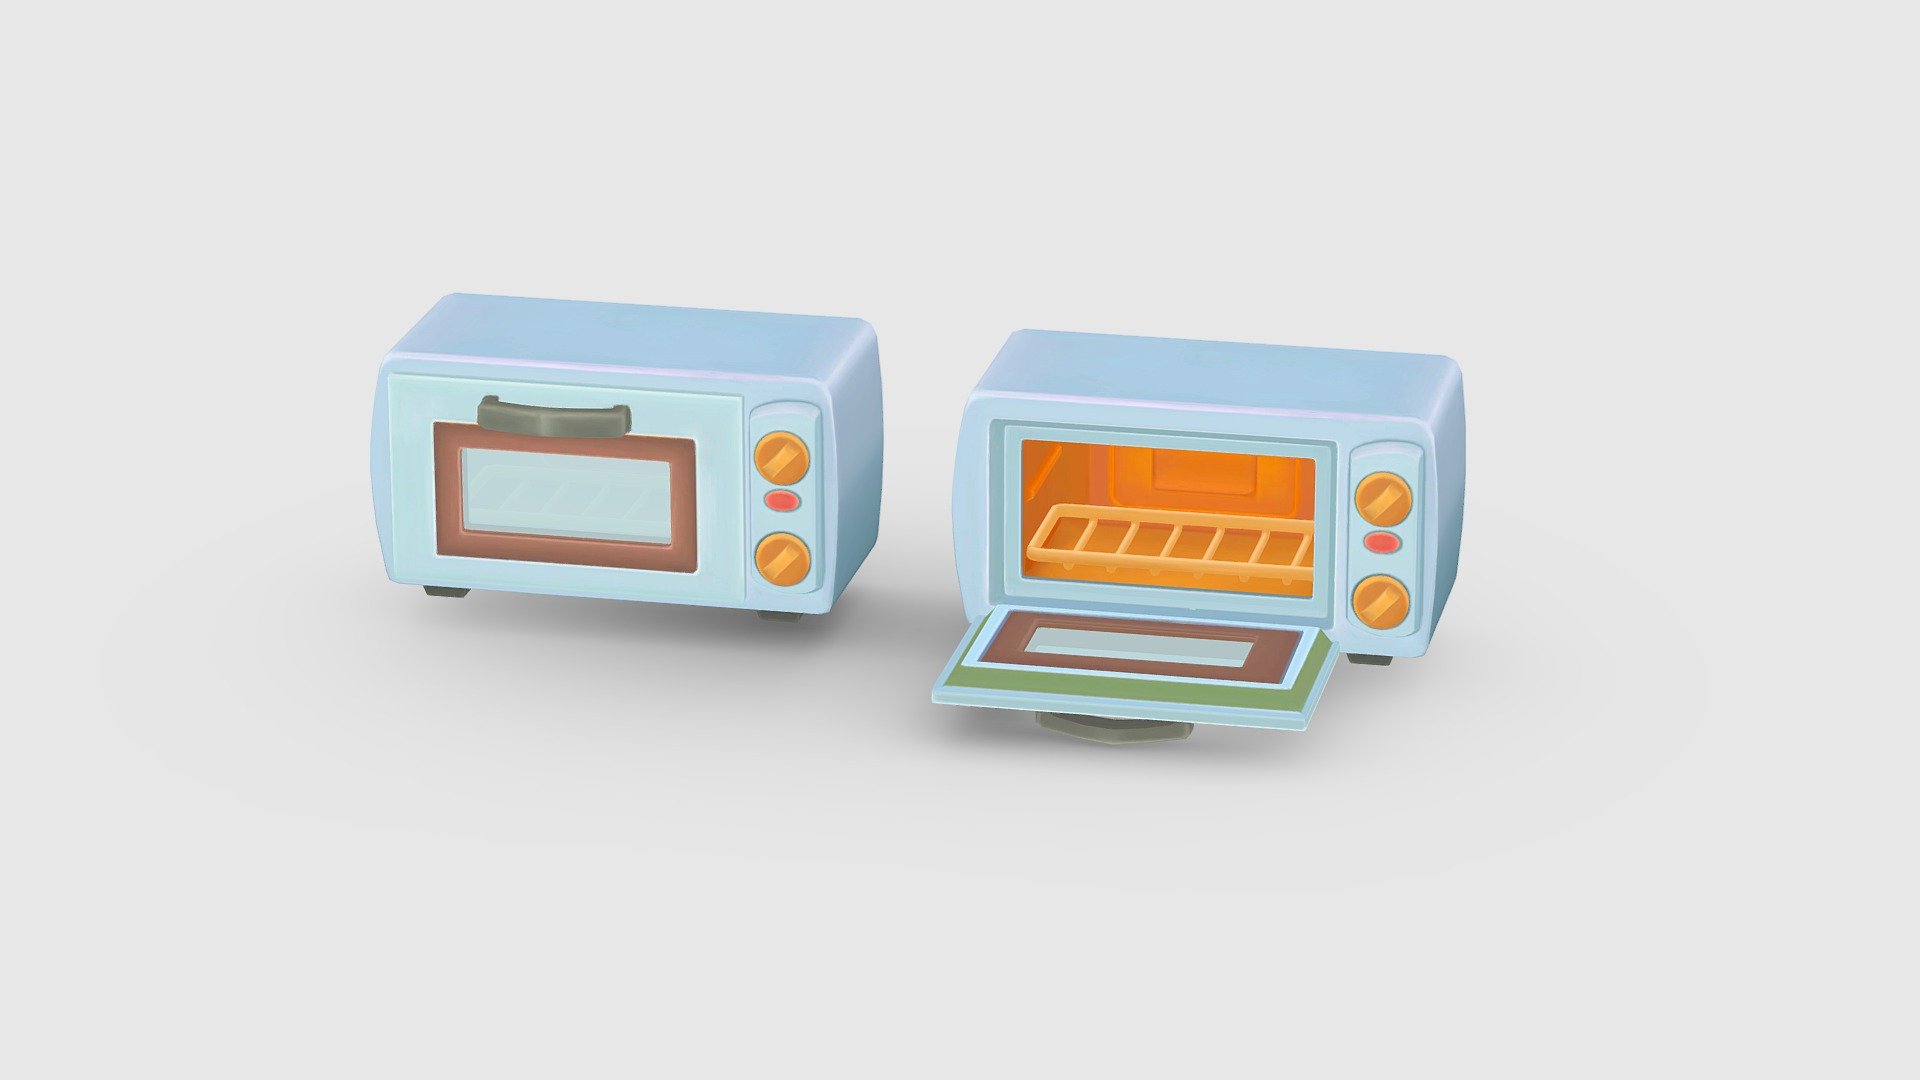 Cartoon electric oven - Food baking appliance Low-poly 3D model - Cartoon electric oven - Food baking appliance - 3D model by ler_cartoon (@lerrrrr) 3d model